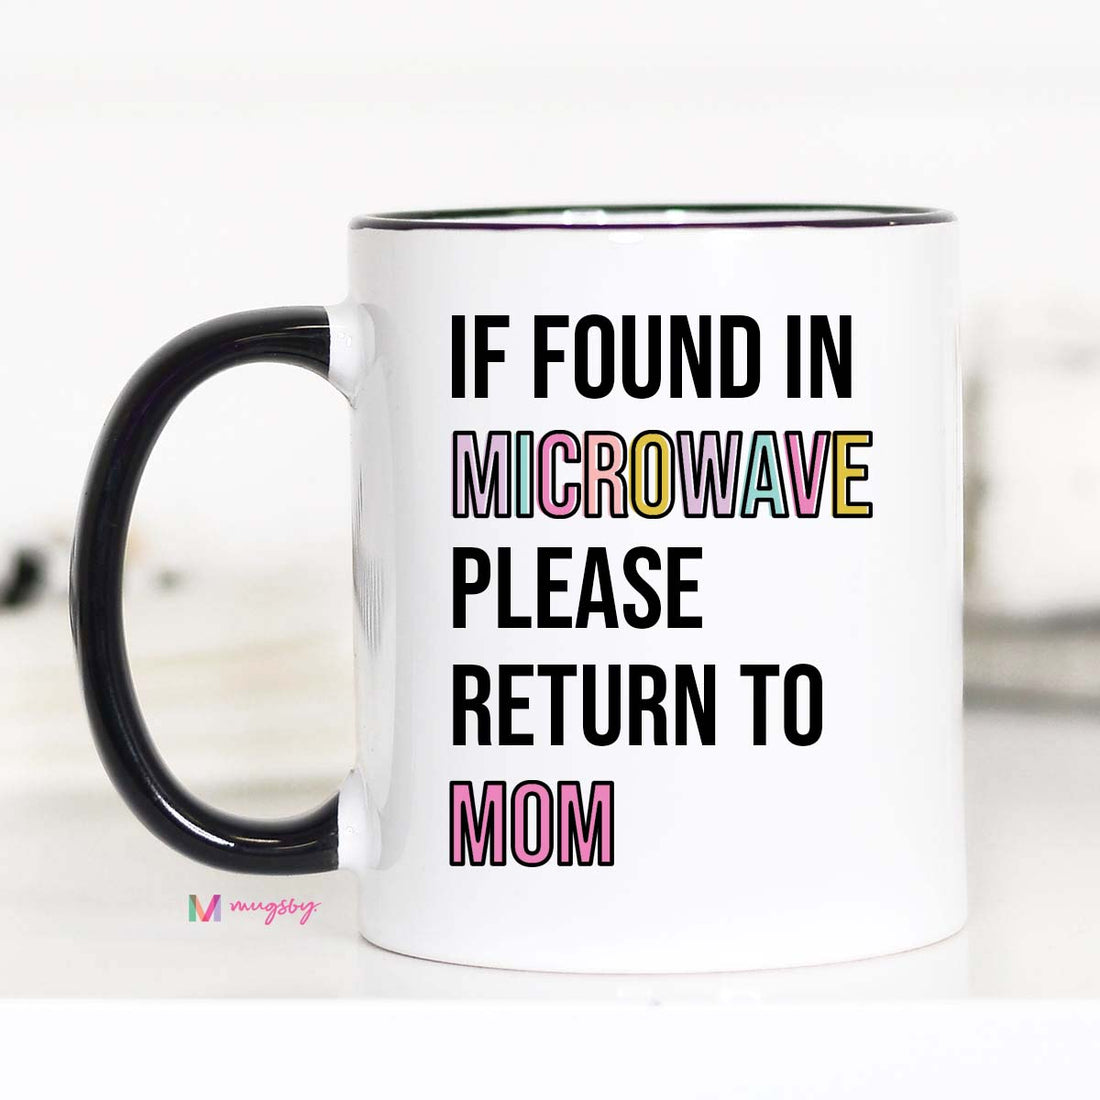 If Found in the Microwave Please Return to Mom Coffee Mug